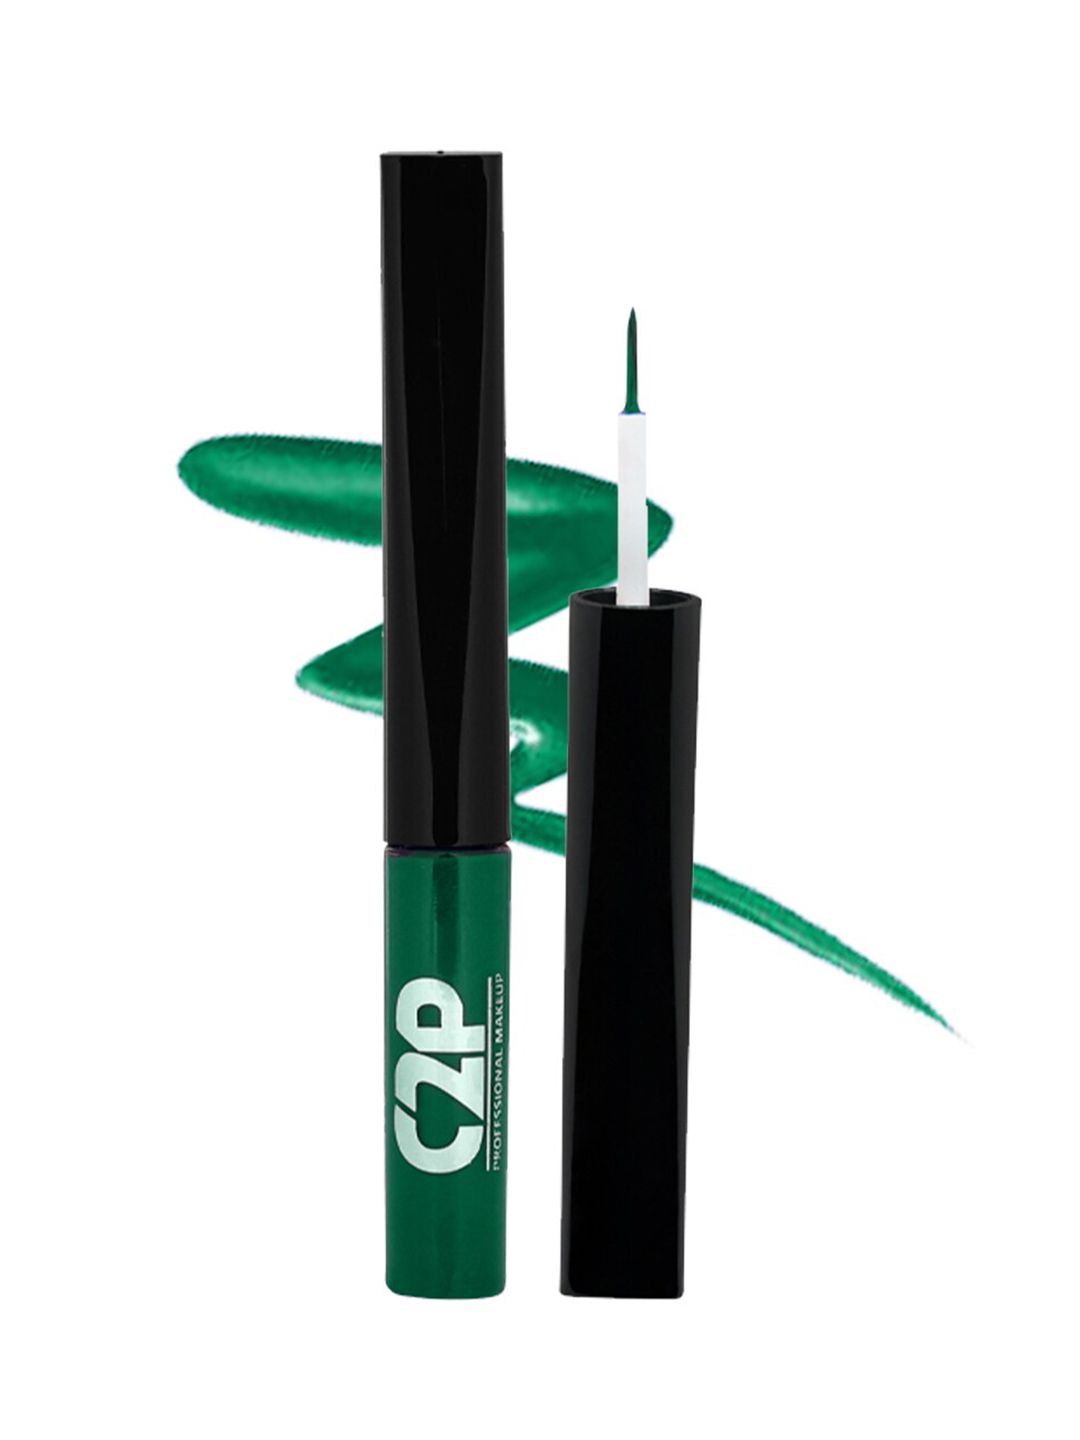 C2P PROFESSIONAL MAKEUP Playmate Matte Eyeliner - Majestic Green 05 Price in India